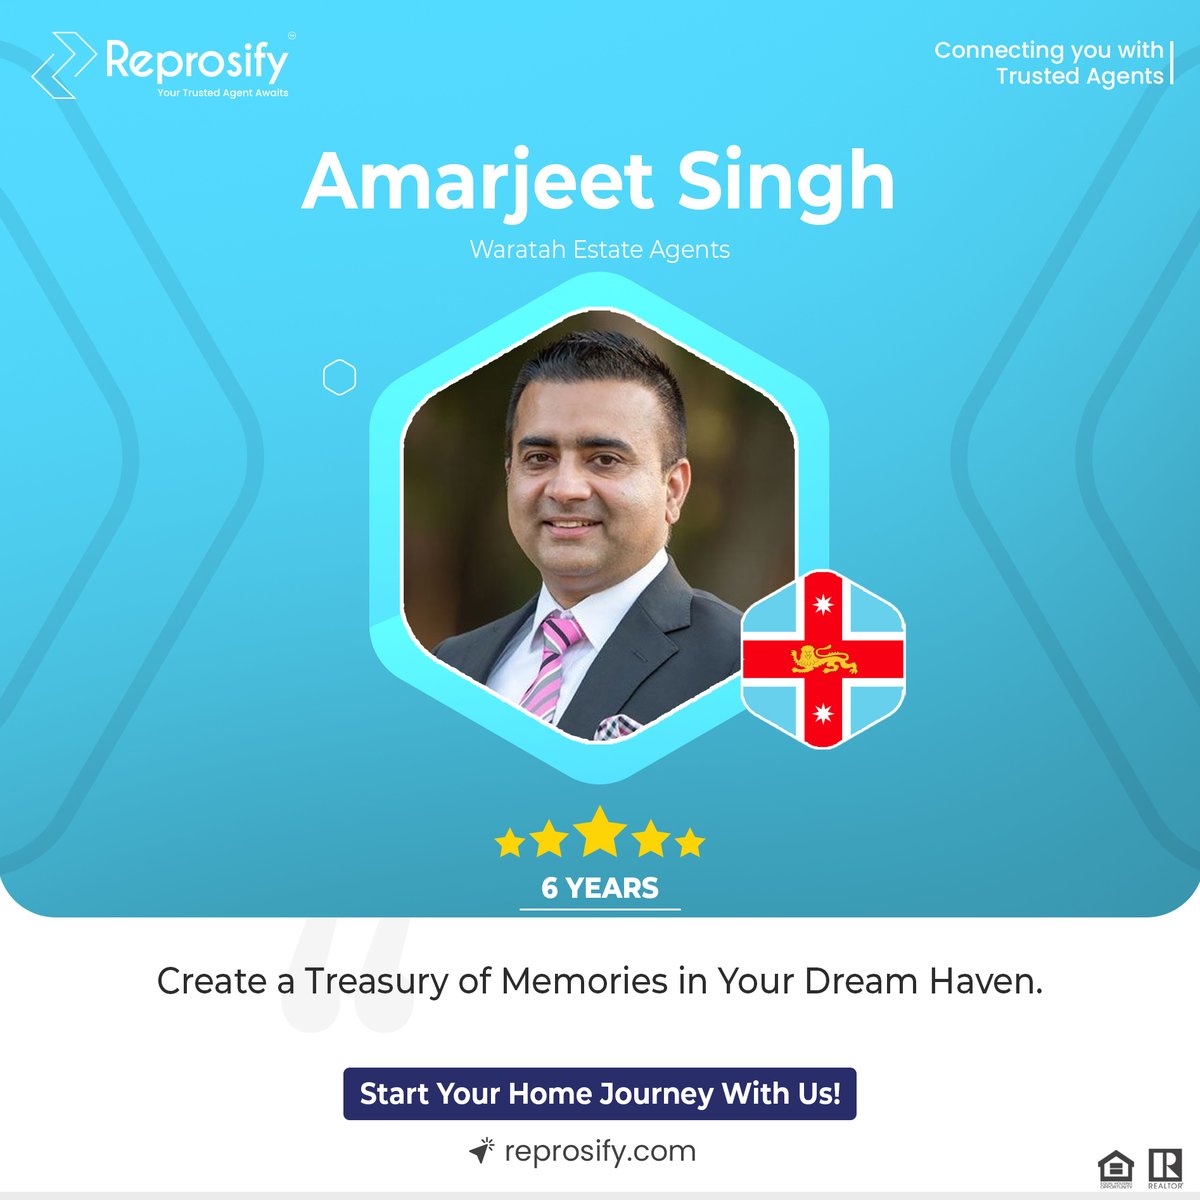 Find your dream home amidst the urban landscapes of New South Wales with Amarjeet Singh.

👤agents.reprosify.com/amarjeet-singh

#Reprosify #AgentsReprosify #WaratahEstateAgents #AmarjeetSingh #realestate #realtor #Broker #NewSouthWalesrealestate #Blacktownrealestate